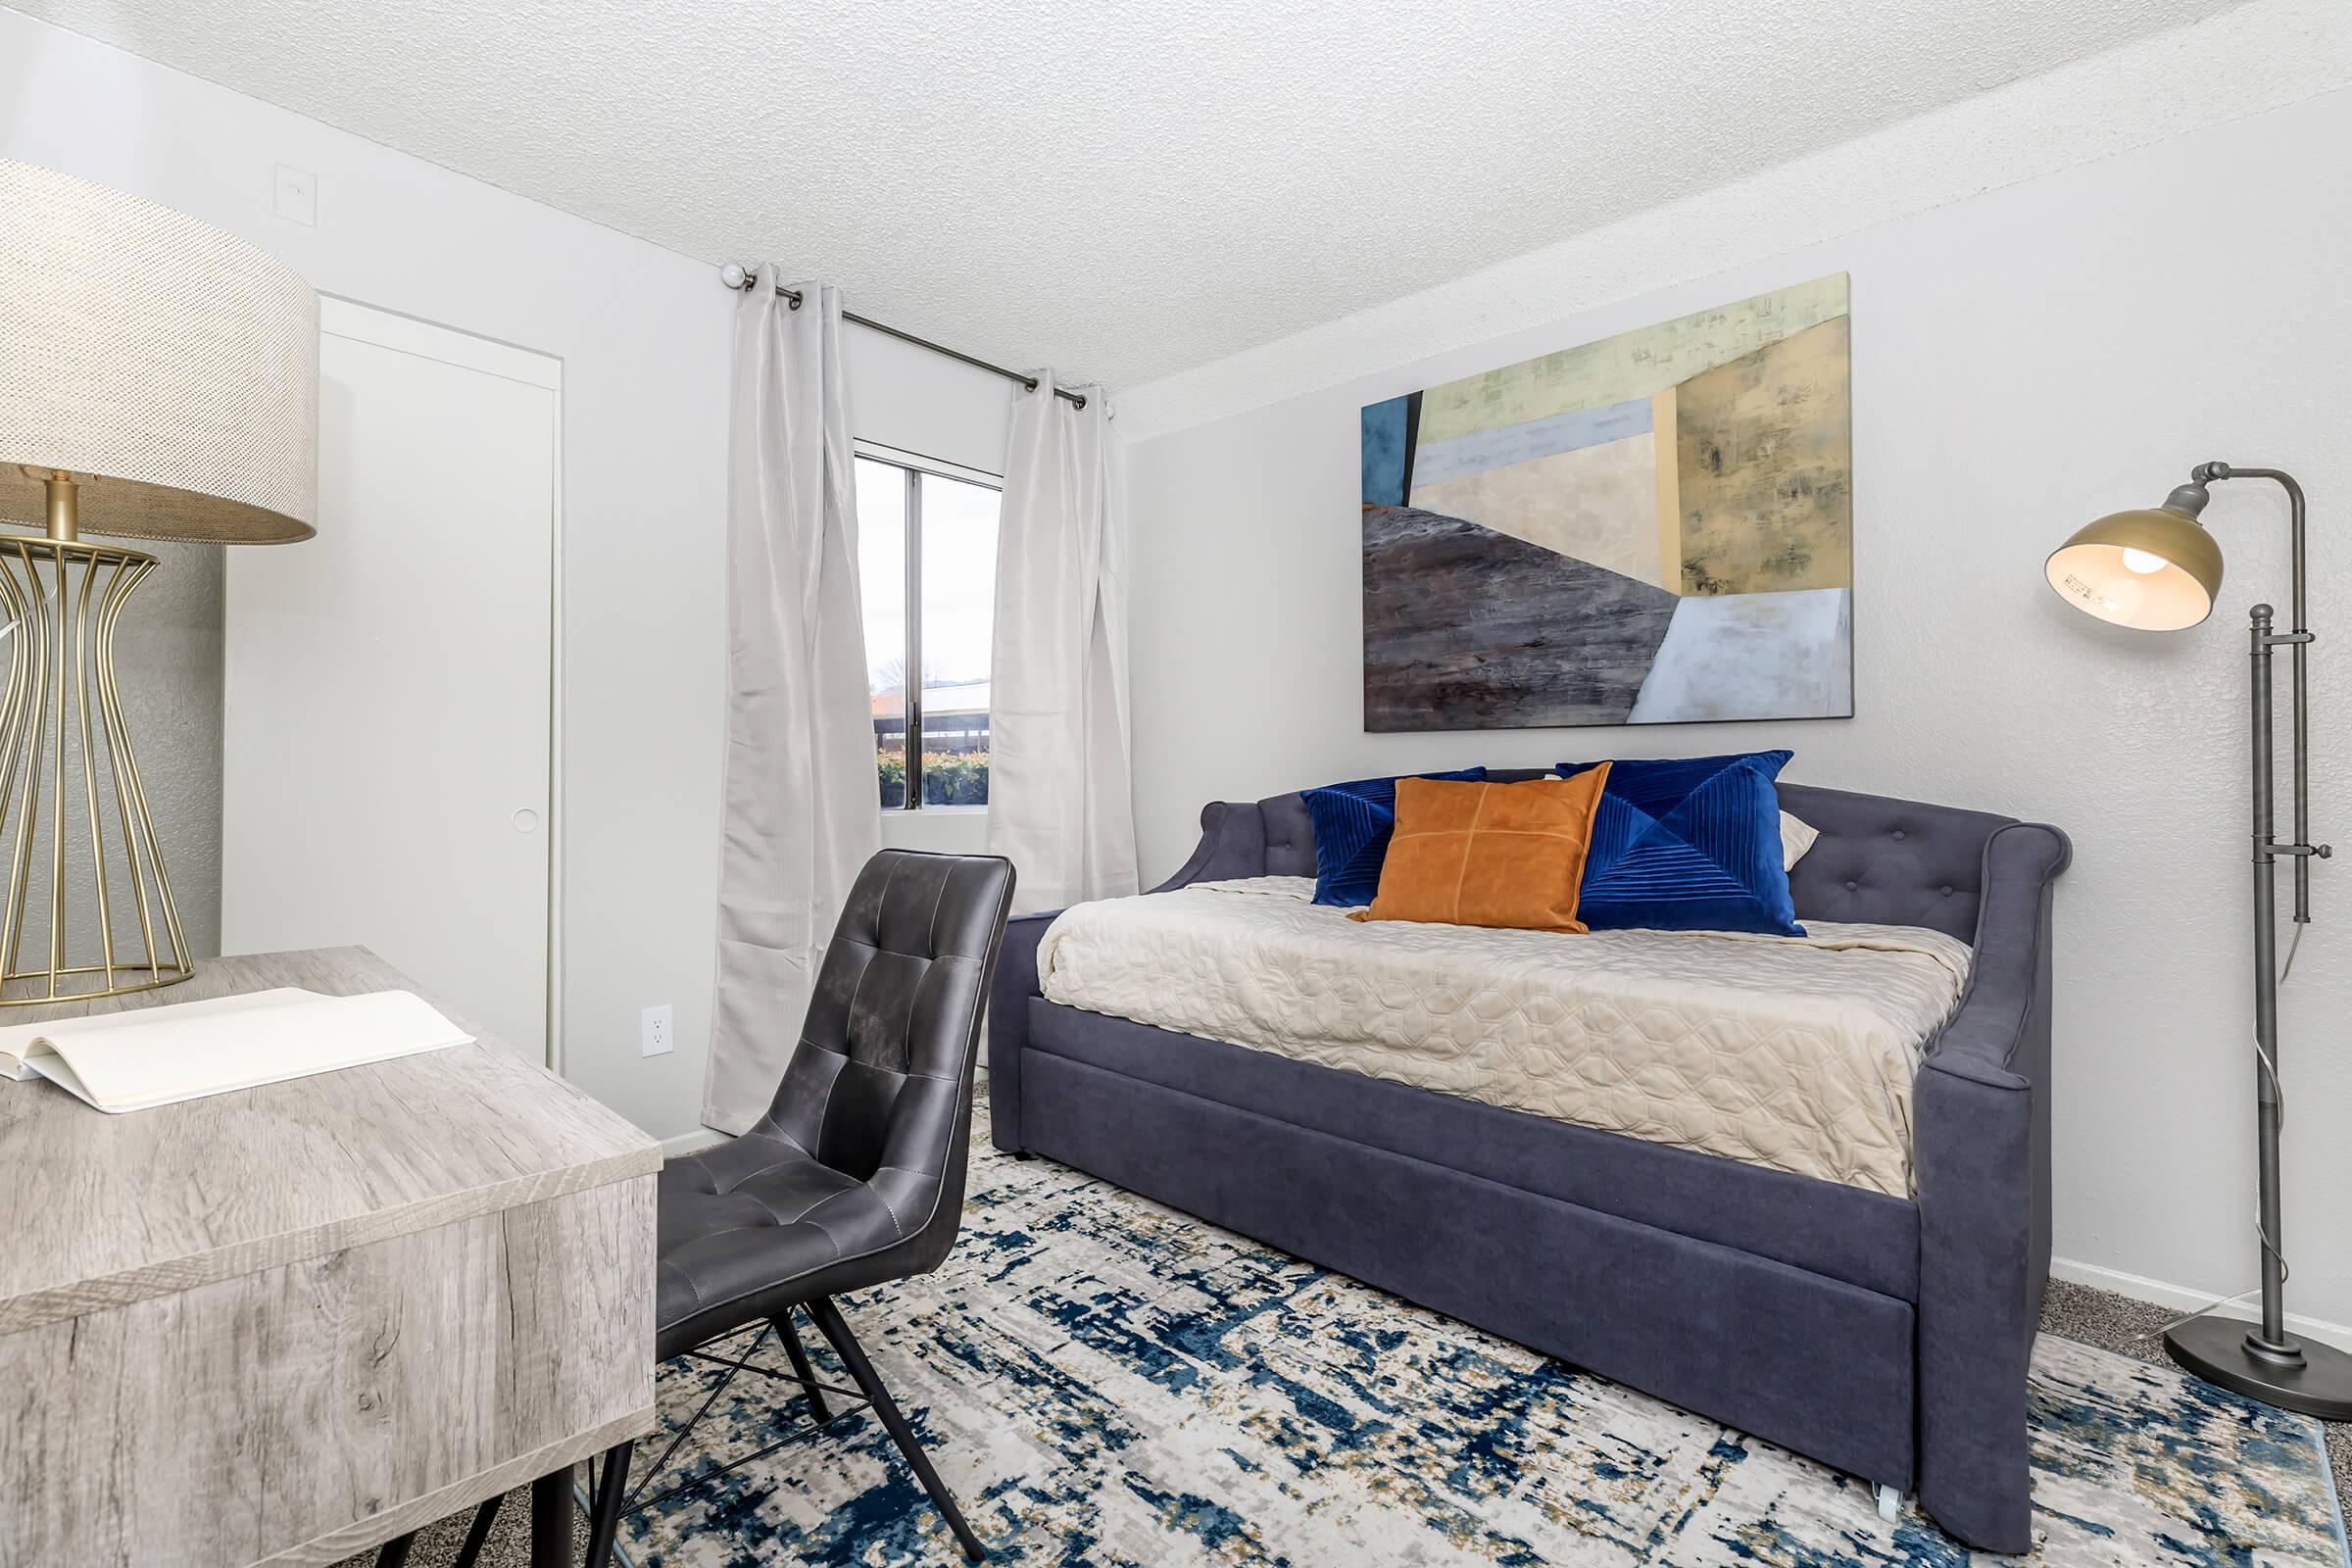 Furnished bedroom with blue and orange accent pillows